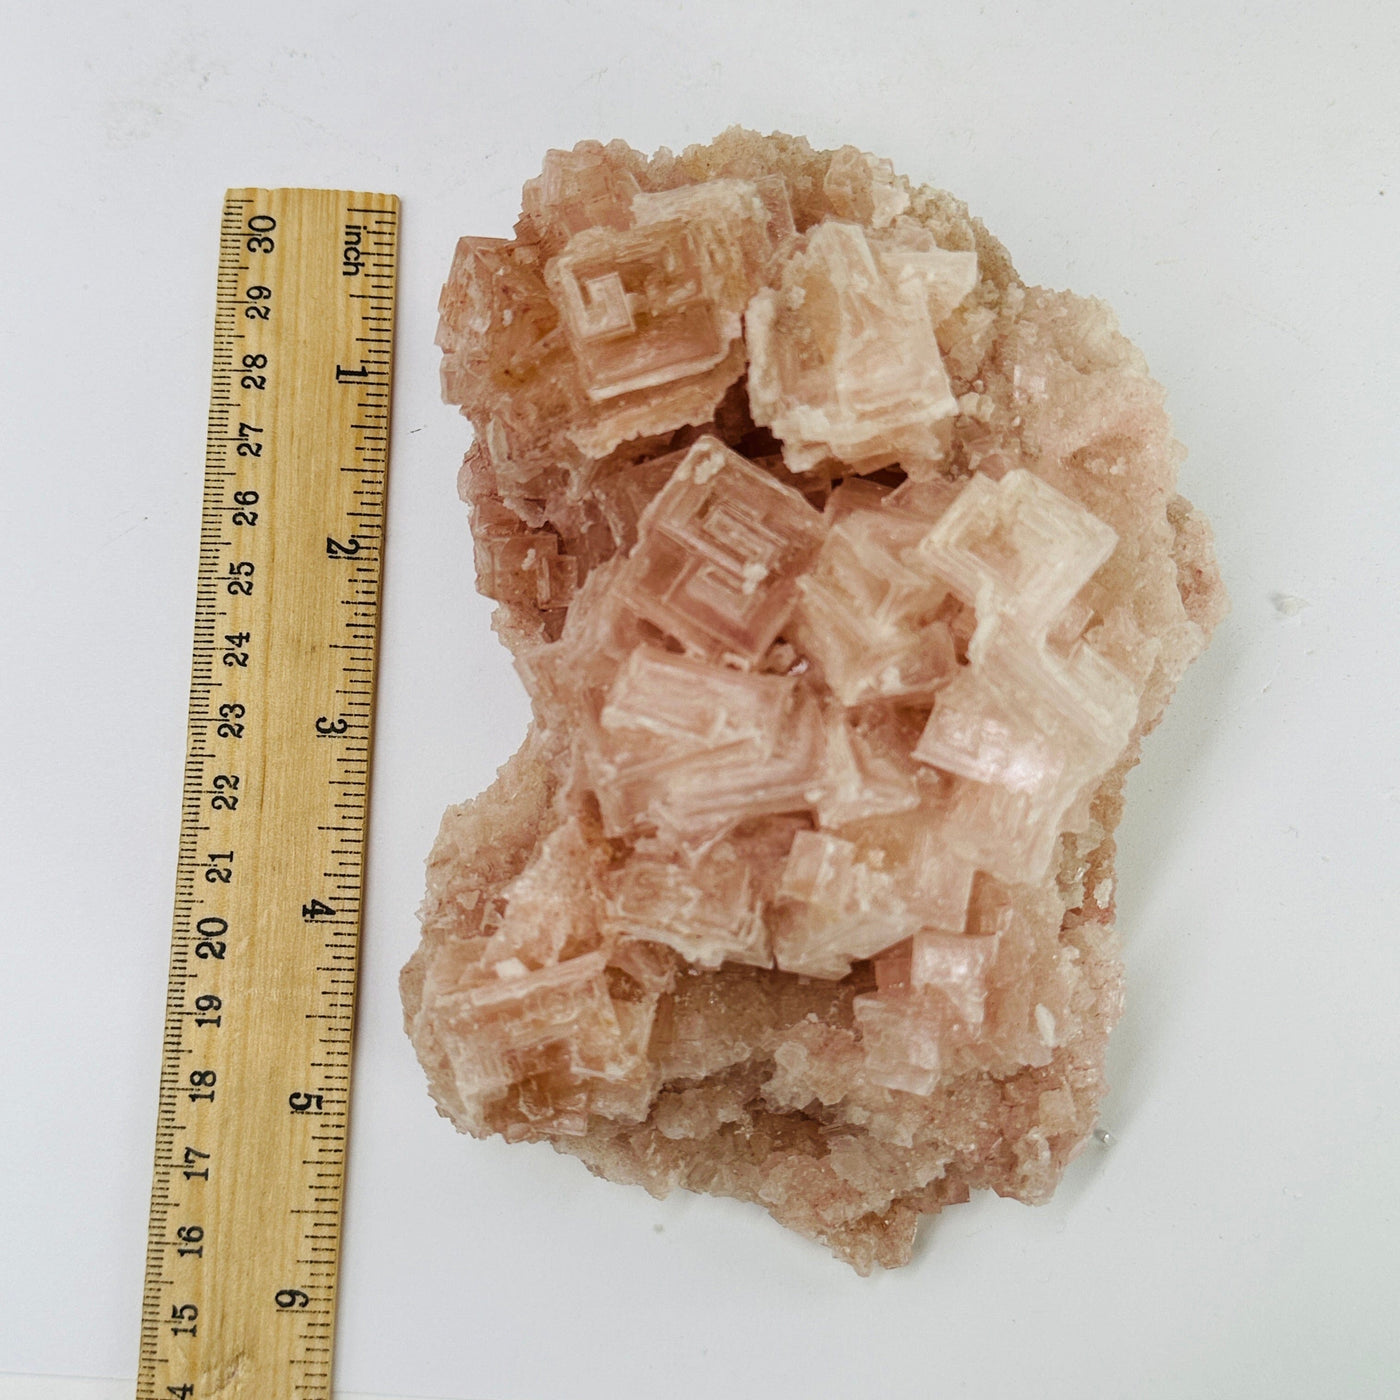 halite cluster next to a ruler for size reference